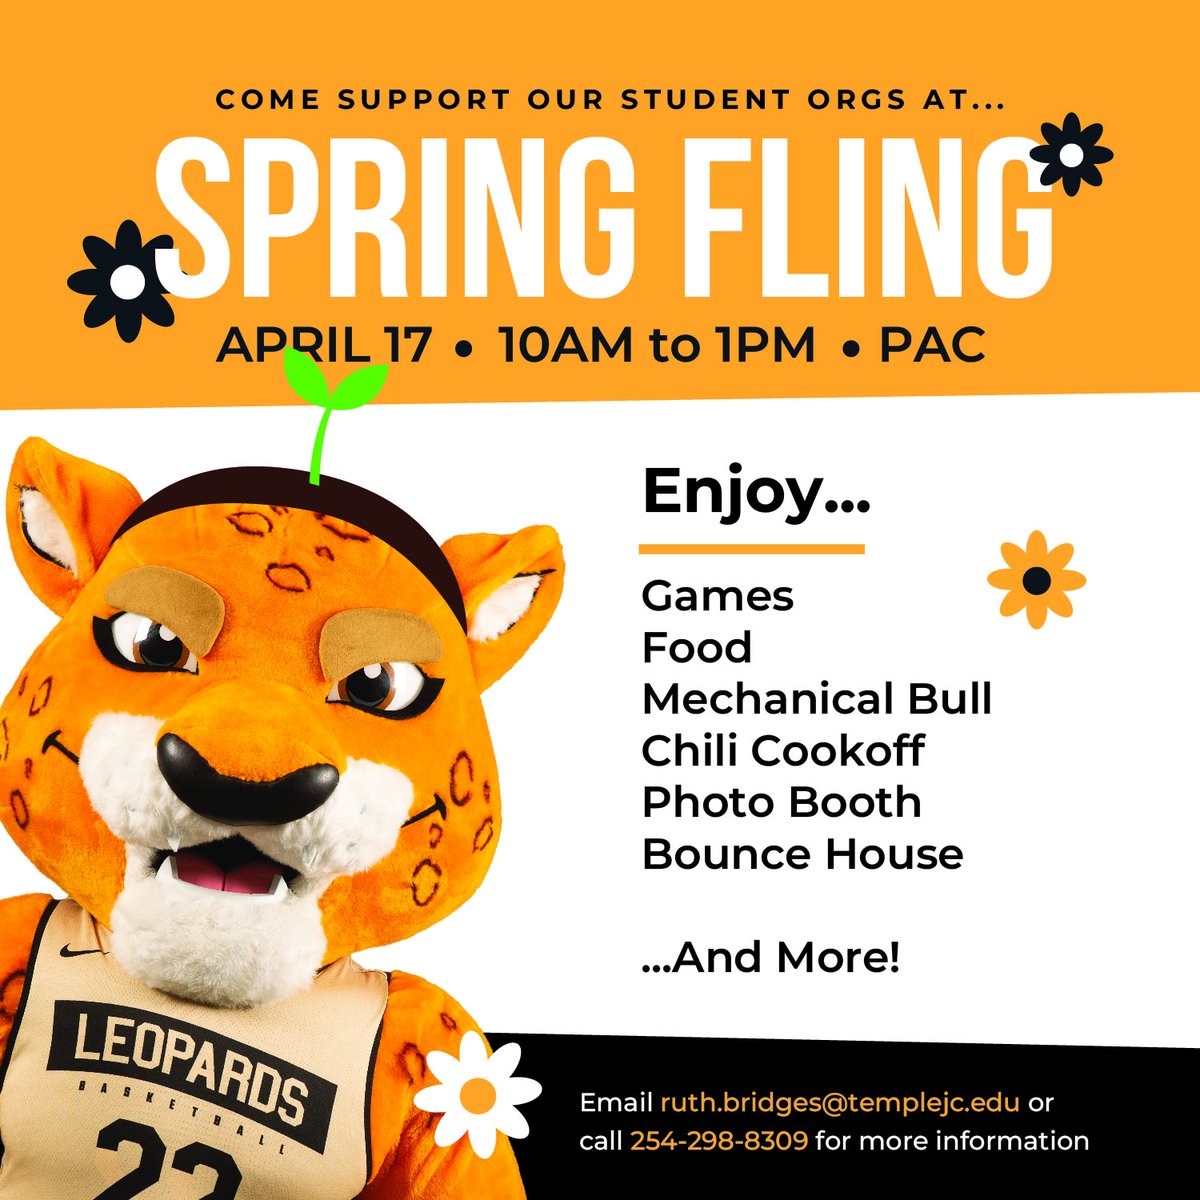 ☀️ LEOPARDS, ARE YOU READY? Spring Fling is THIS WEDNESDAY! 🐆 #YourCommunitysCollege